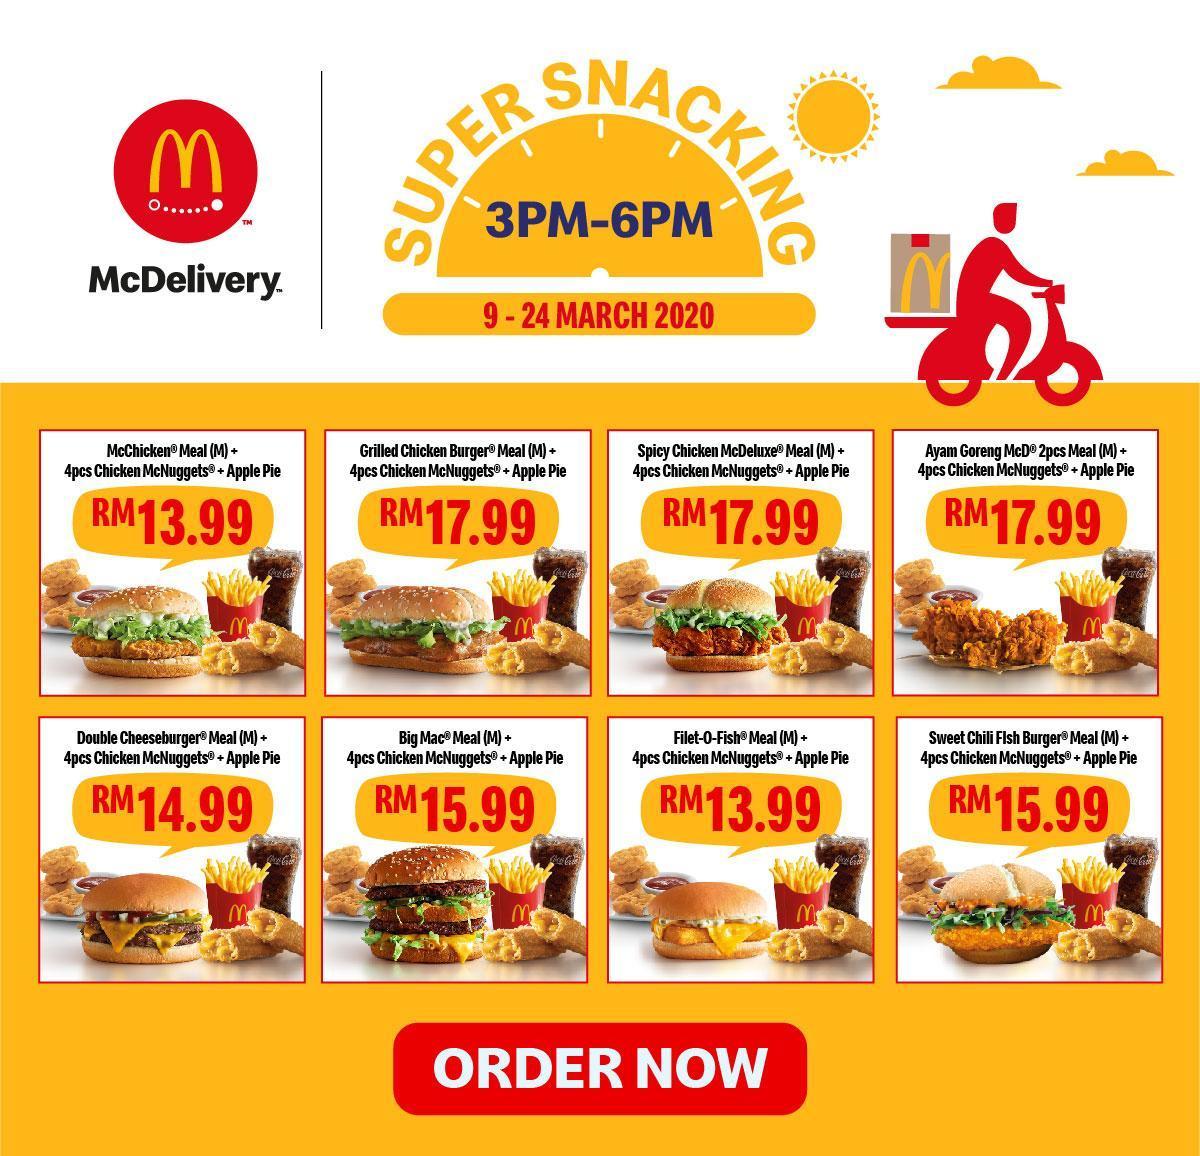 McDonald’s Latest Promos Allow You To Save Up To 50